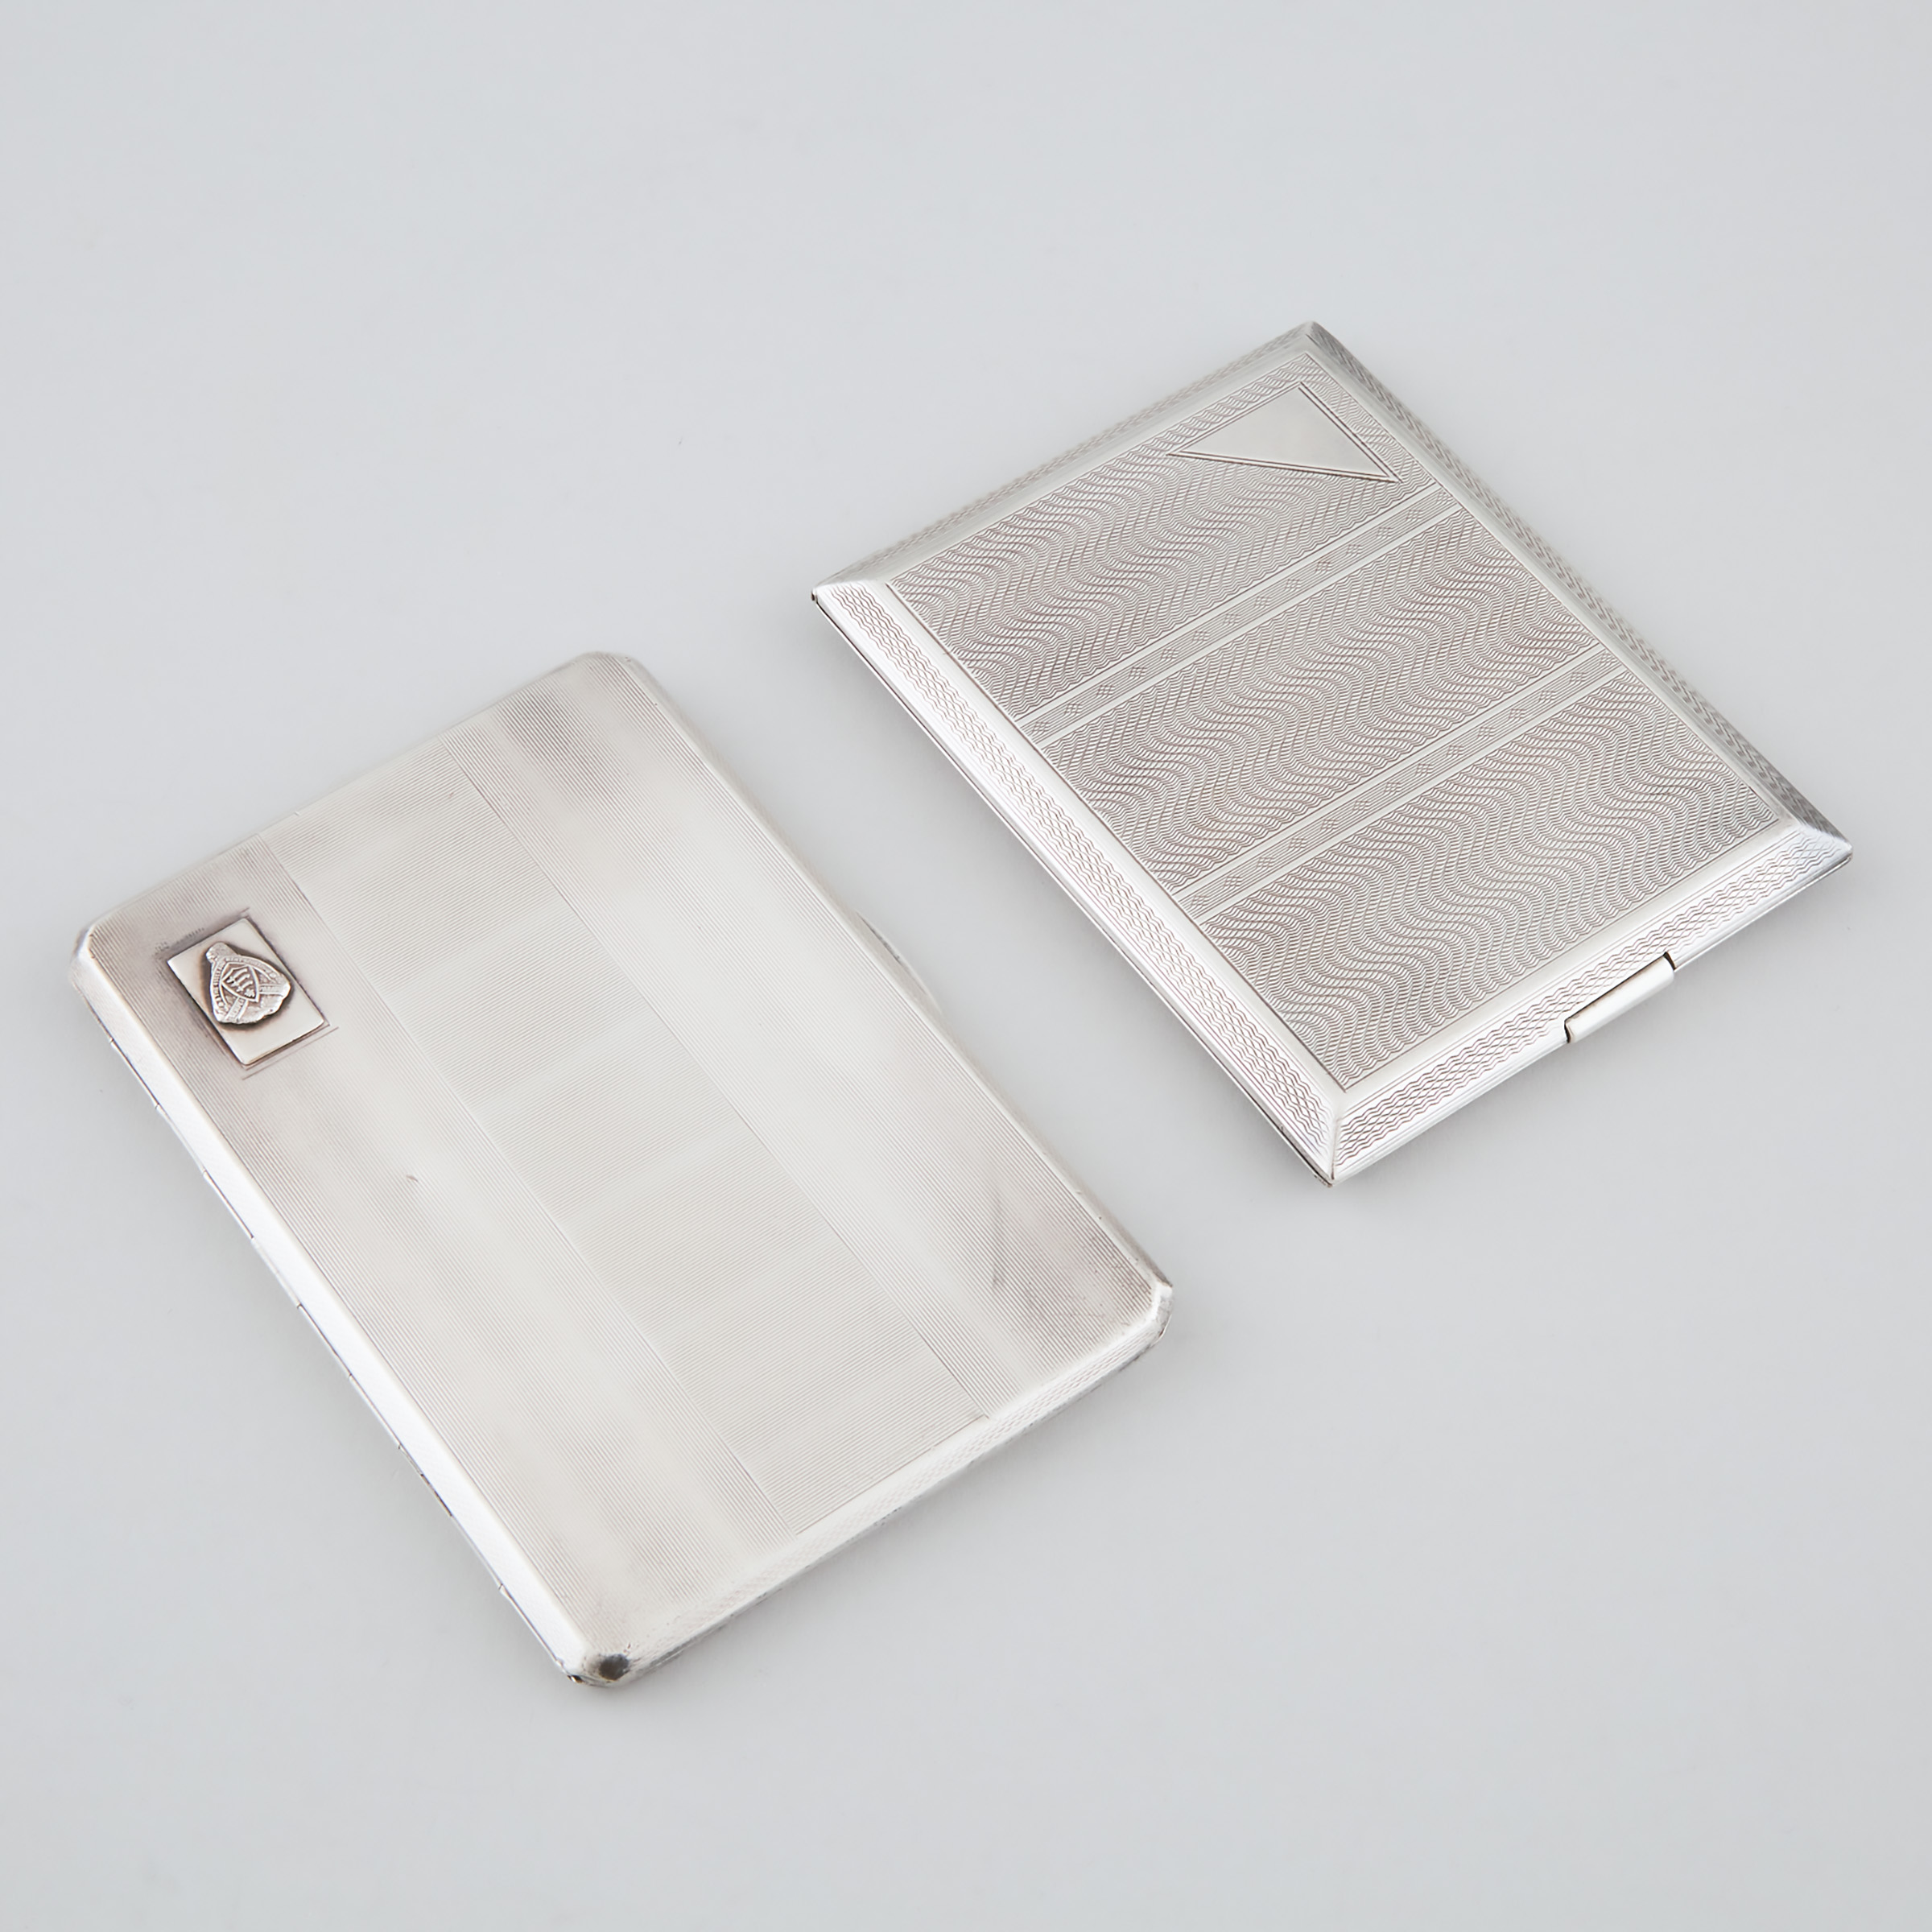 Two English Silver Cigarette Cases, Samuel M. Levi, and W. T. Toghill & Co. for Henry Birks & Co., Birmingham, 1928/1950